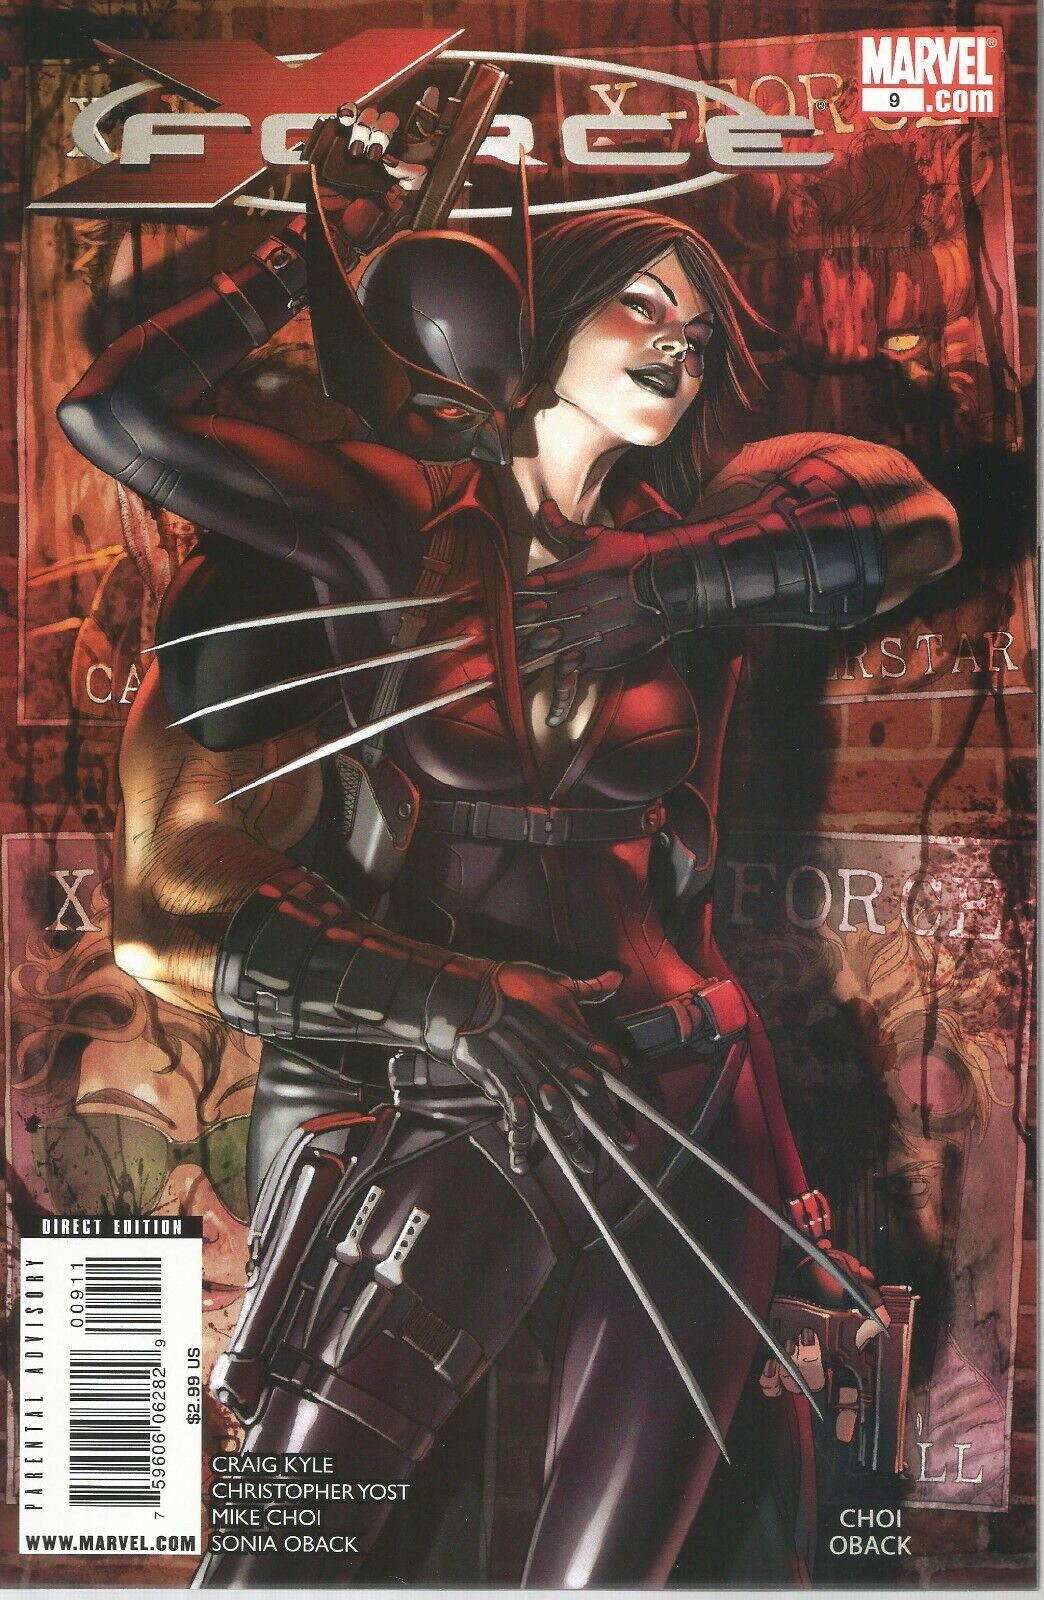 X-Force #9 2009 - Mike Choi Cover - Wolverine & Domino  NM+